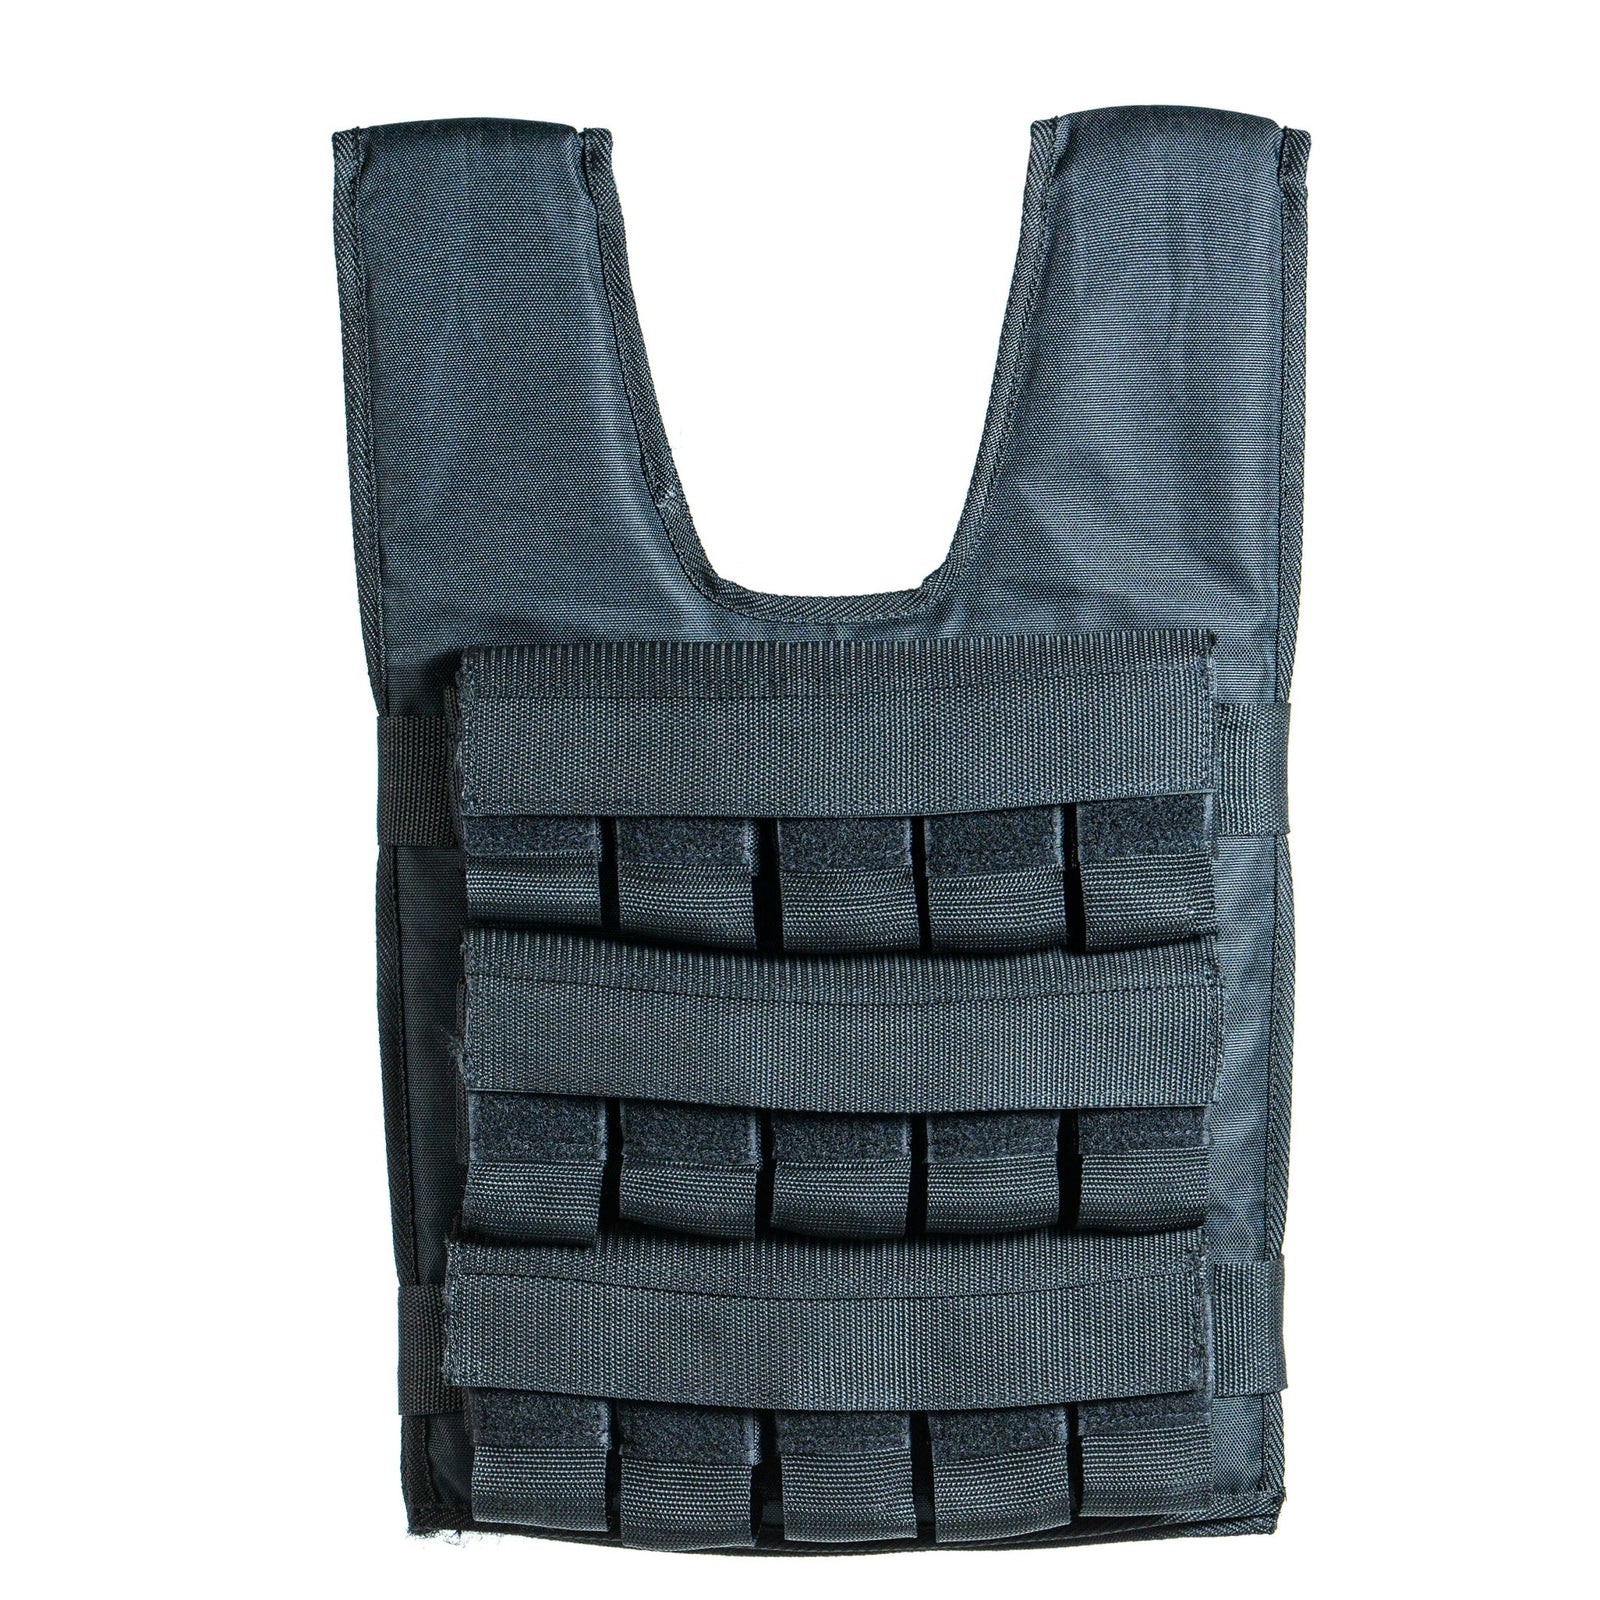 110LB Adjustable Weighted Vest, Weighted Vest Workout Equipment